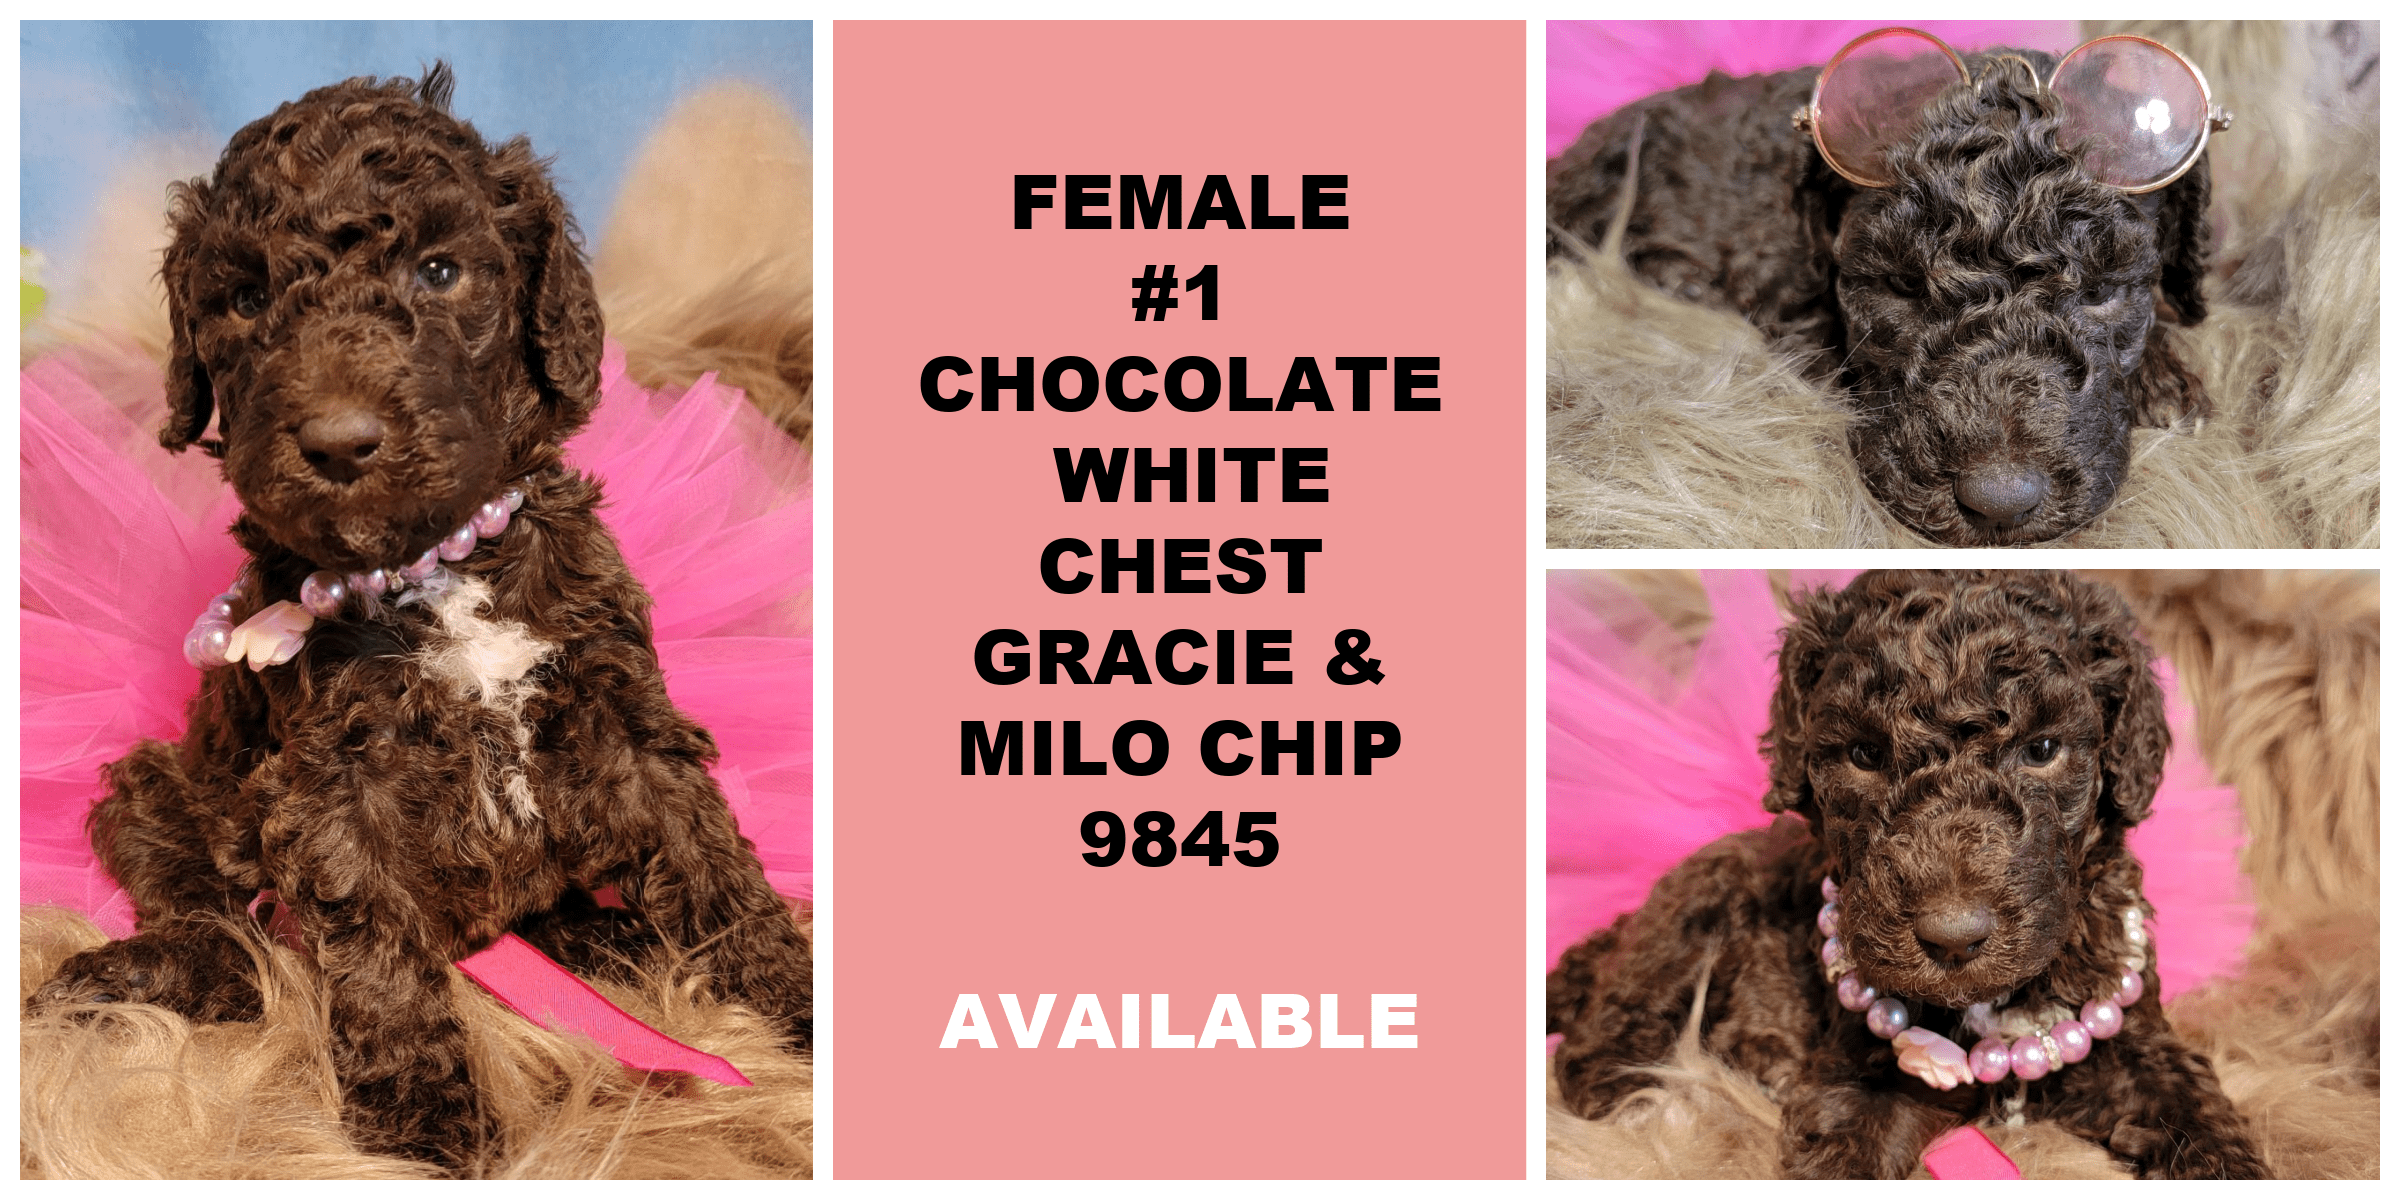 FEMALE 1 CHOCOLATE WHITE CHEST GRACIE MILO CHIP 9845 AVAILABLE